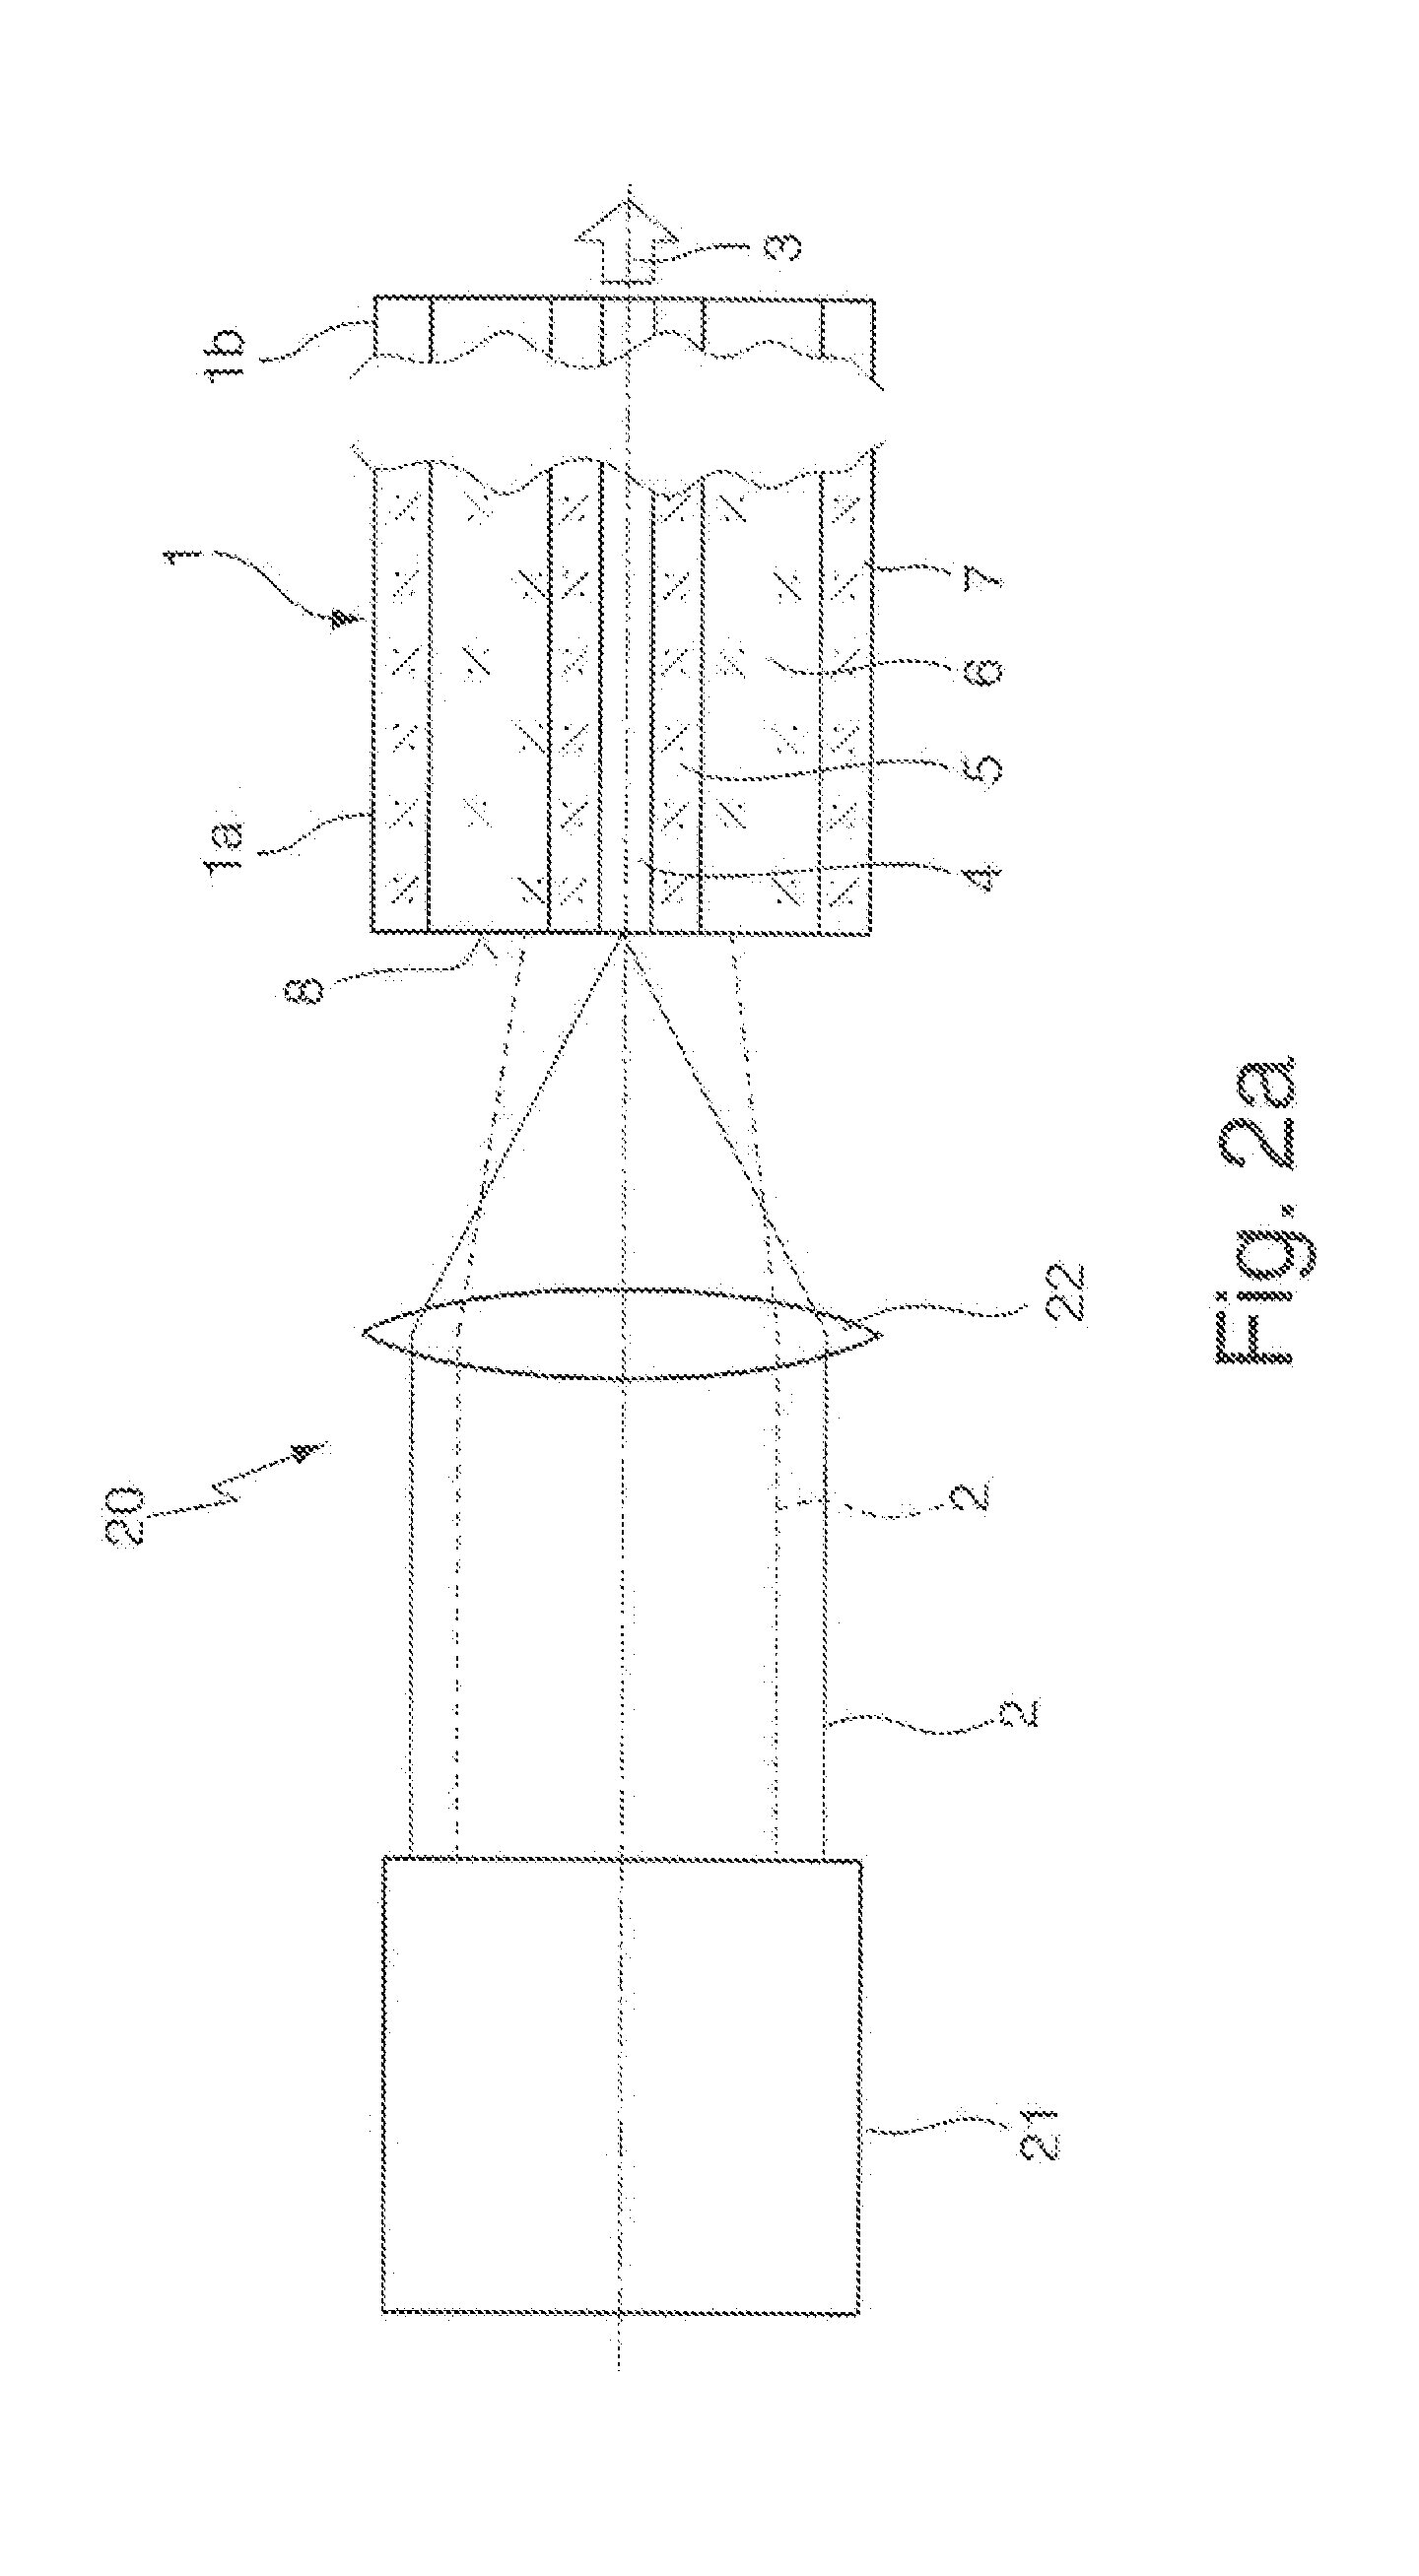 Method and arrangement for generating a laser beam having a differing beam profile characteristic by means of a multi-clad fiber